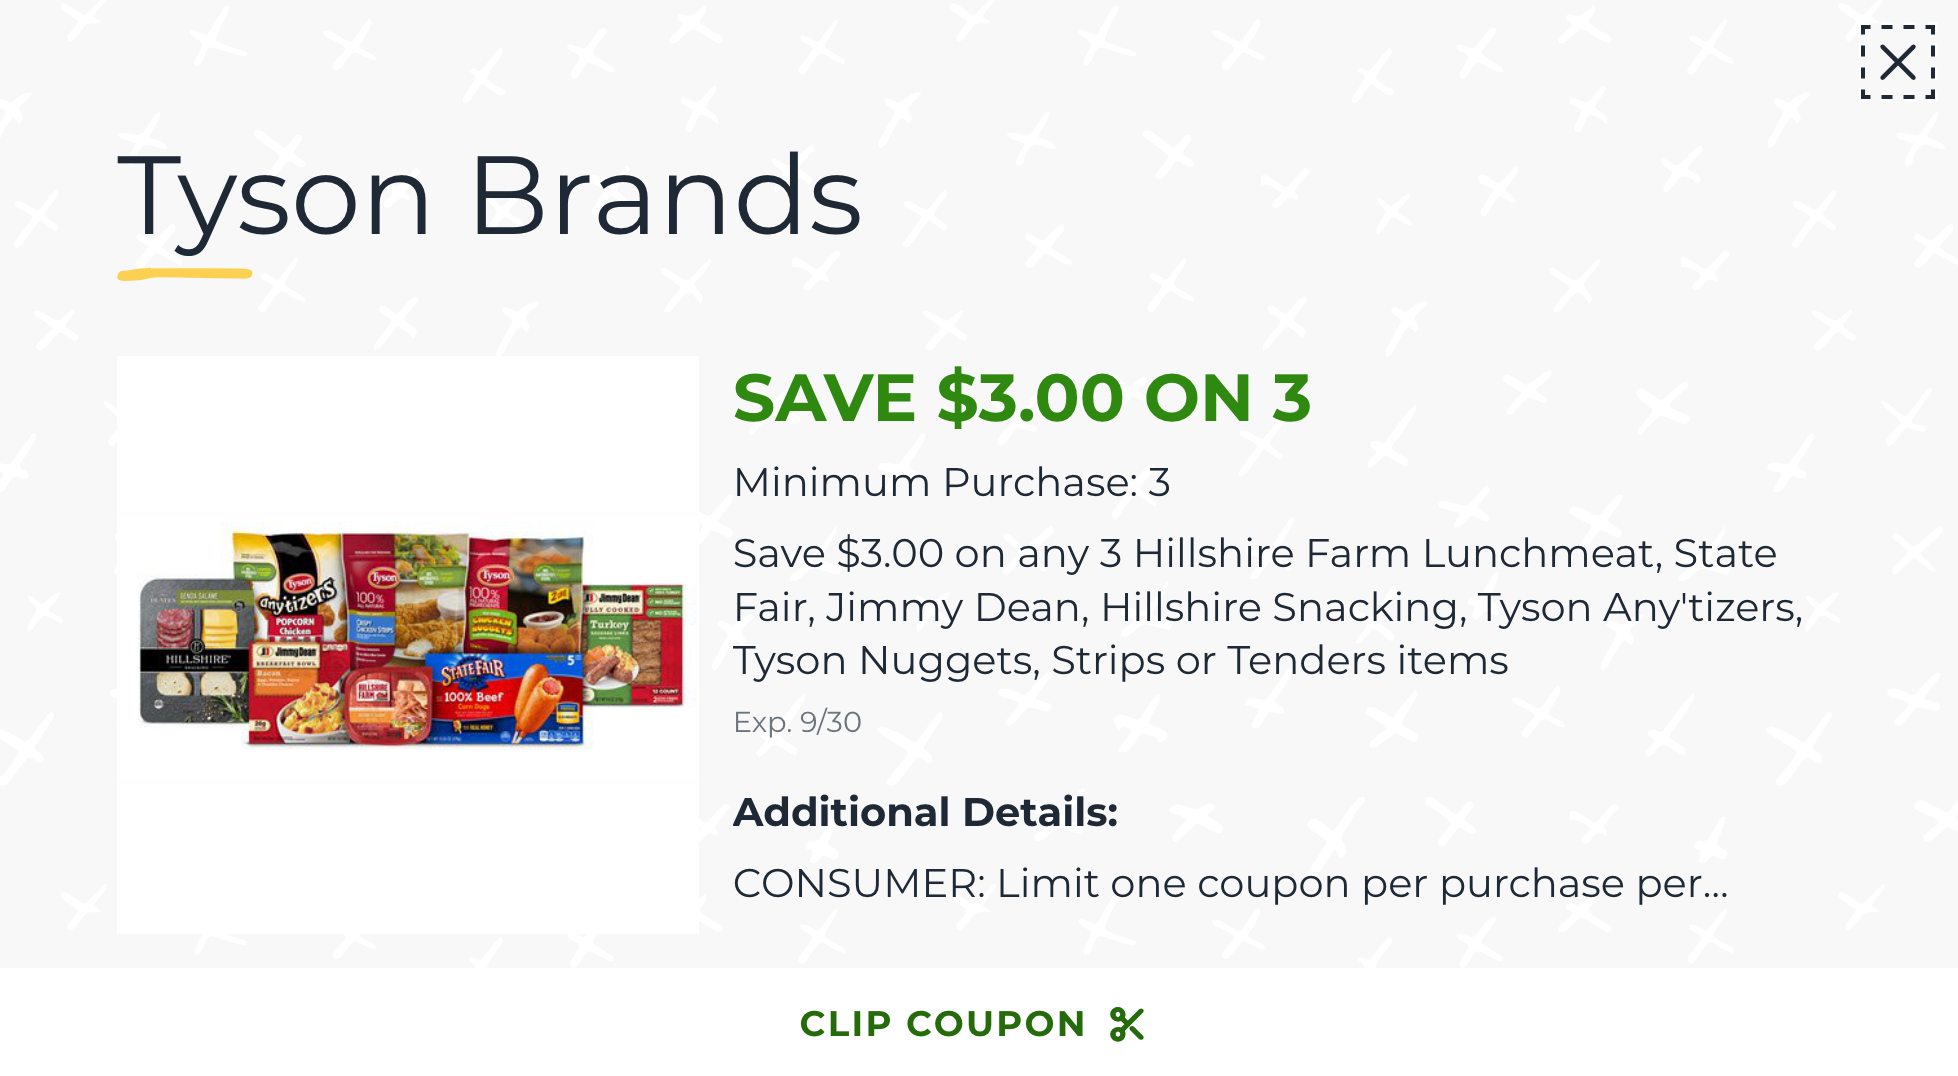 Look To Tyson® For Delicious Products For Back To School - Find Your Family's Favorites At Publix on I Heart Publix